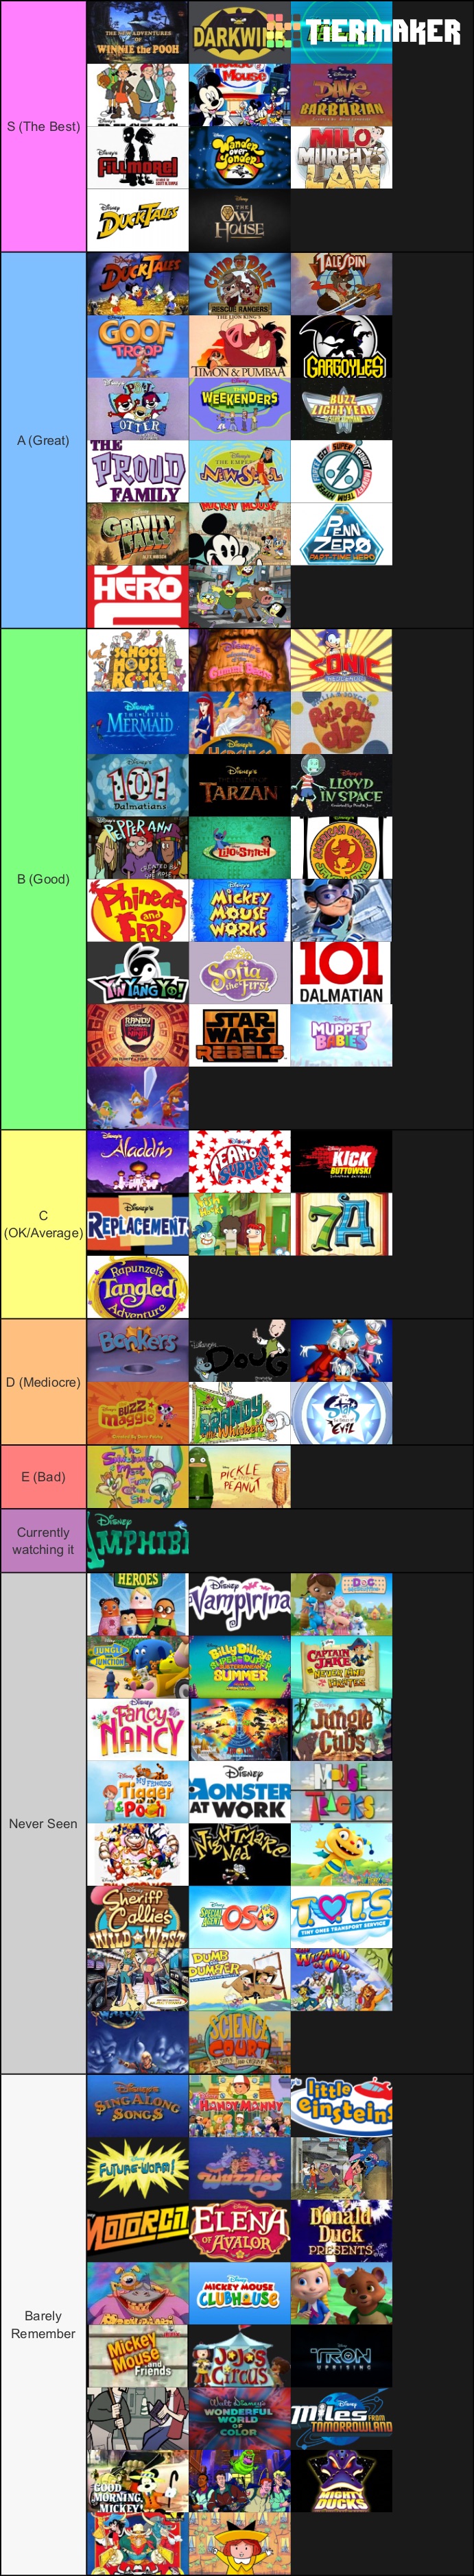 My Disney/ABC Animated Shows Tier List by FireMaster92 on DeviantArt